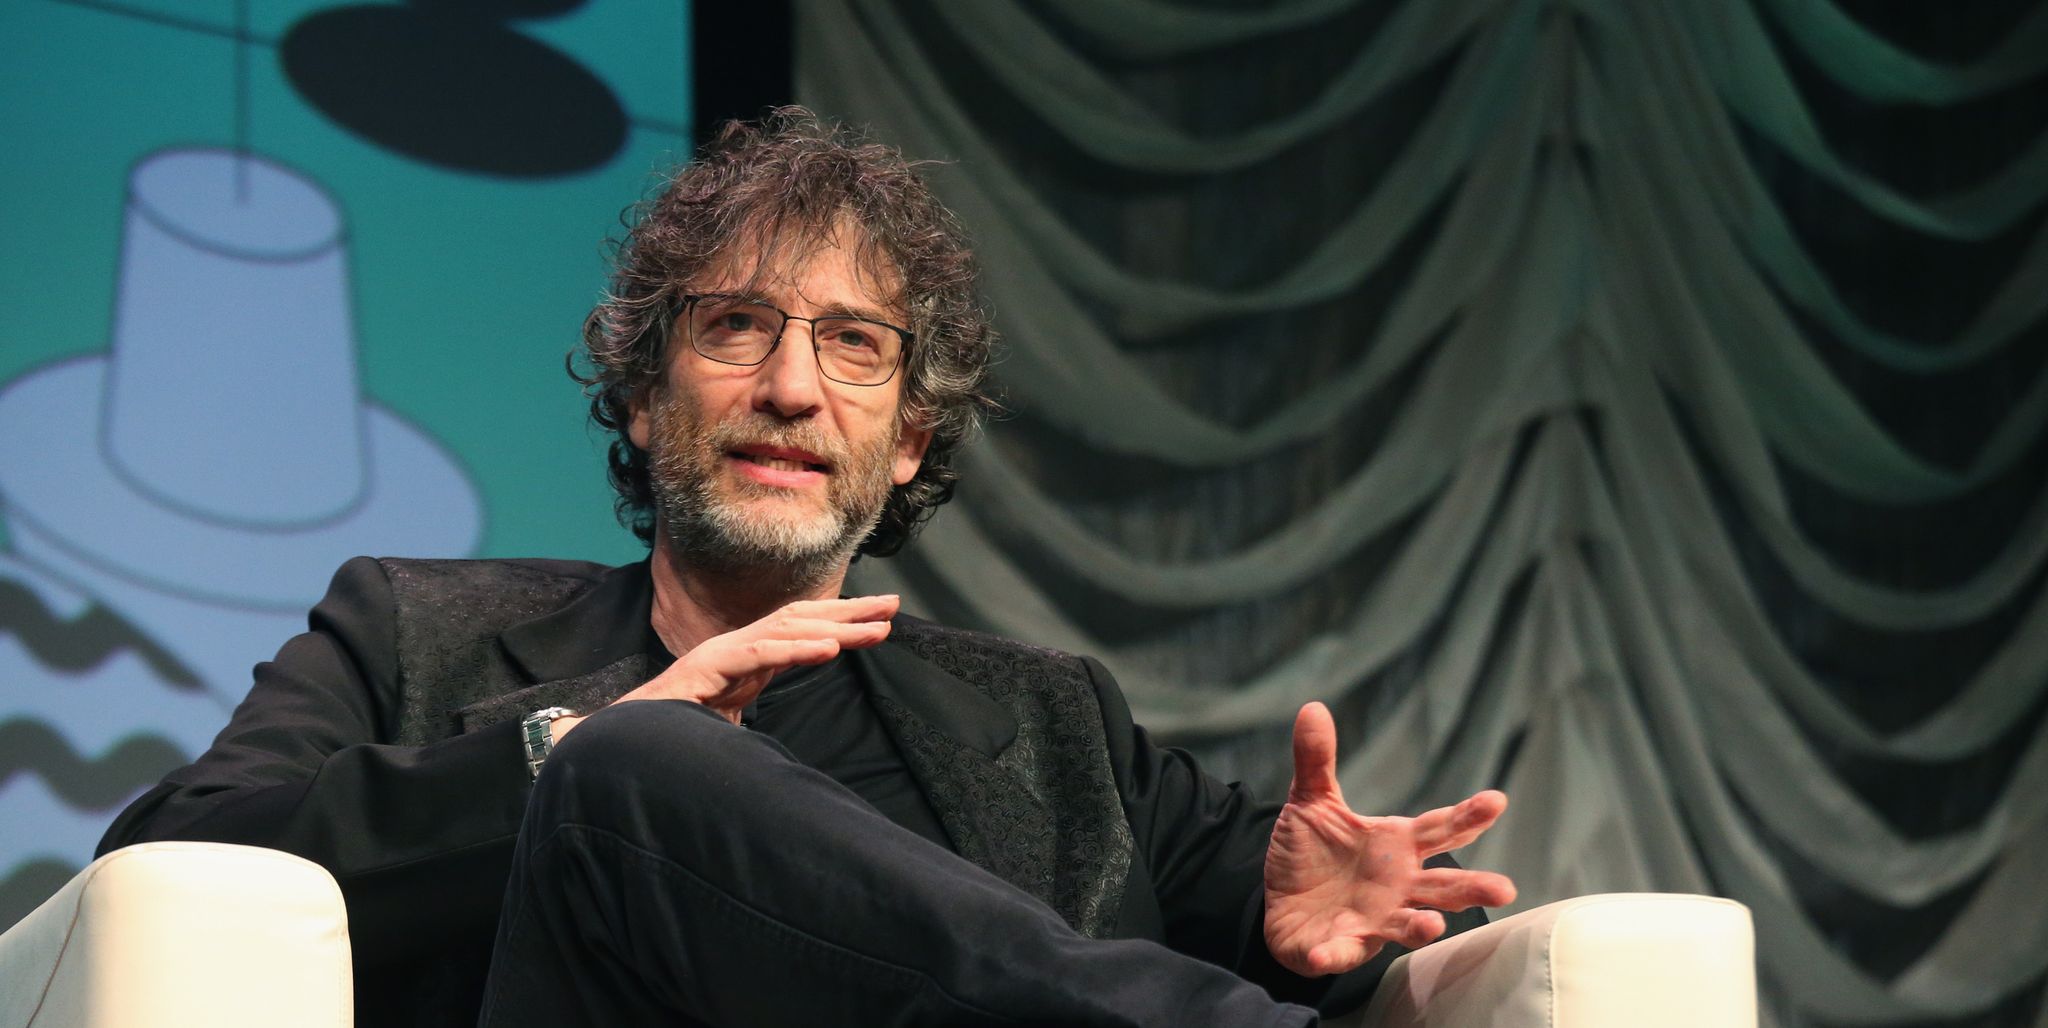 austin, texas   march 09  neil gaiman speaks onstage at featured session neil gaiman at the austin convention center during the sxsw conference and festival on march 9, 2019 in austin, texas  photo by gary millerfilmmagic